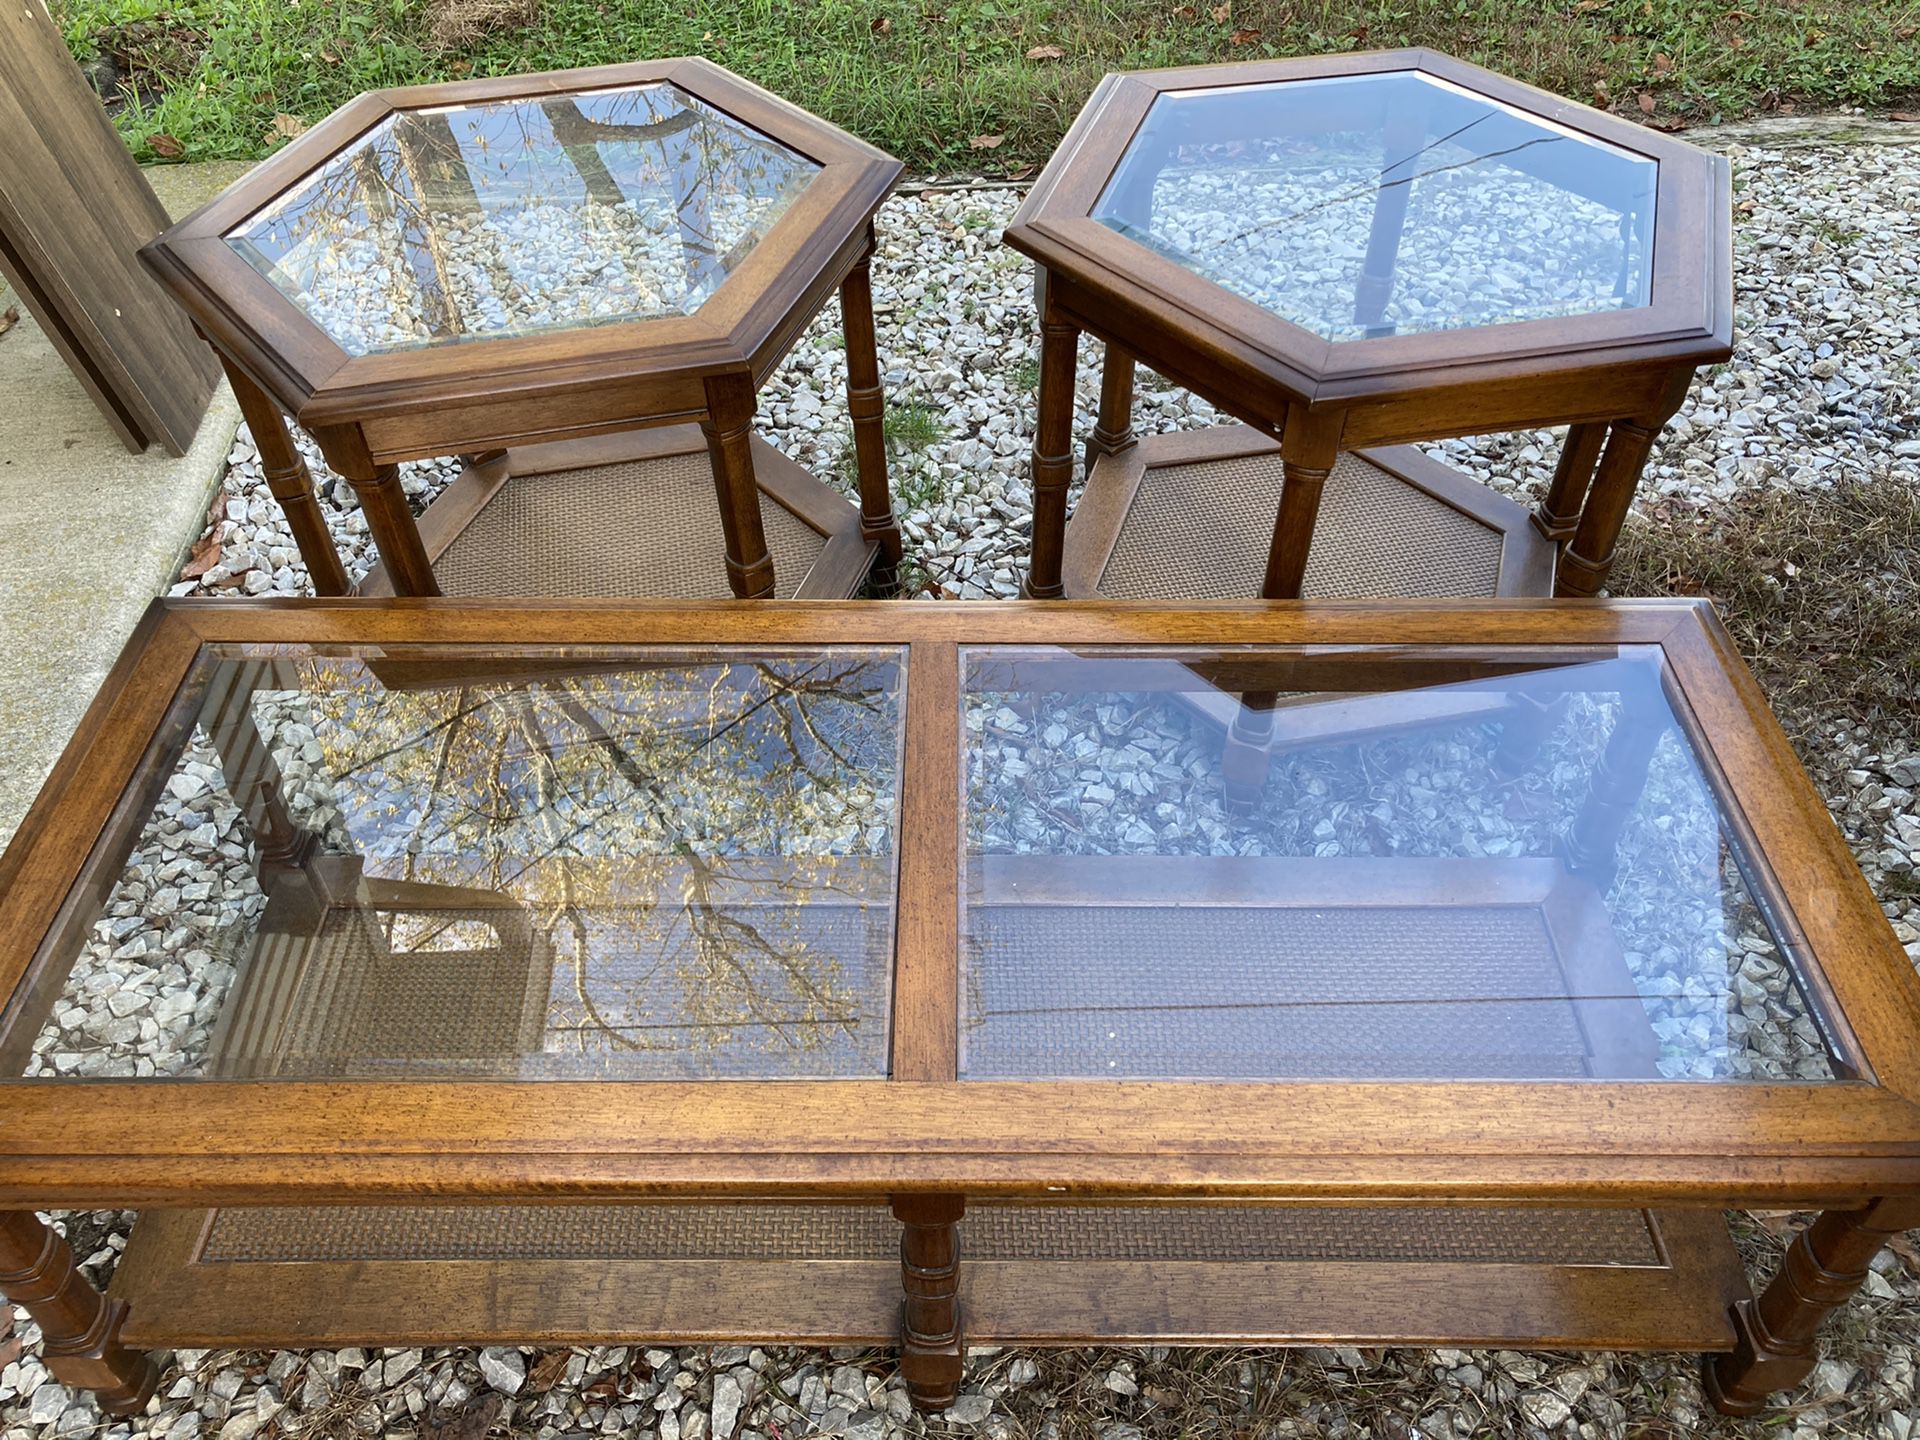 Coffee table and two side tables